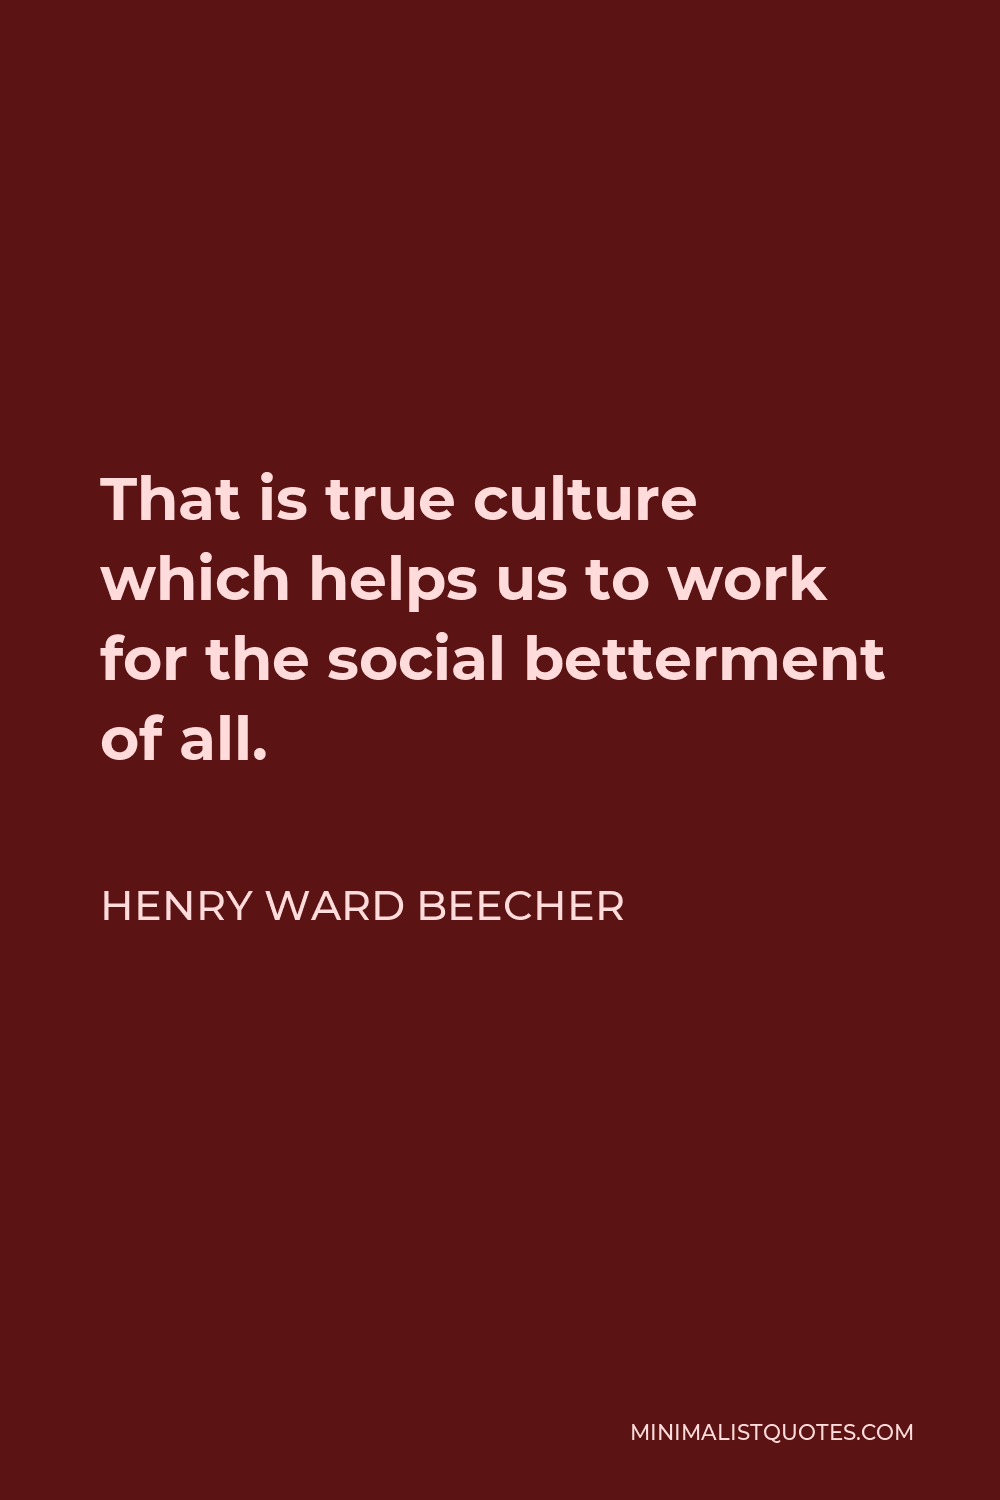 Henry Ward Beecher Quote - That is true culture which helps us to work for the social betterment of all.